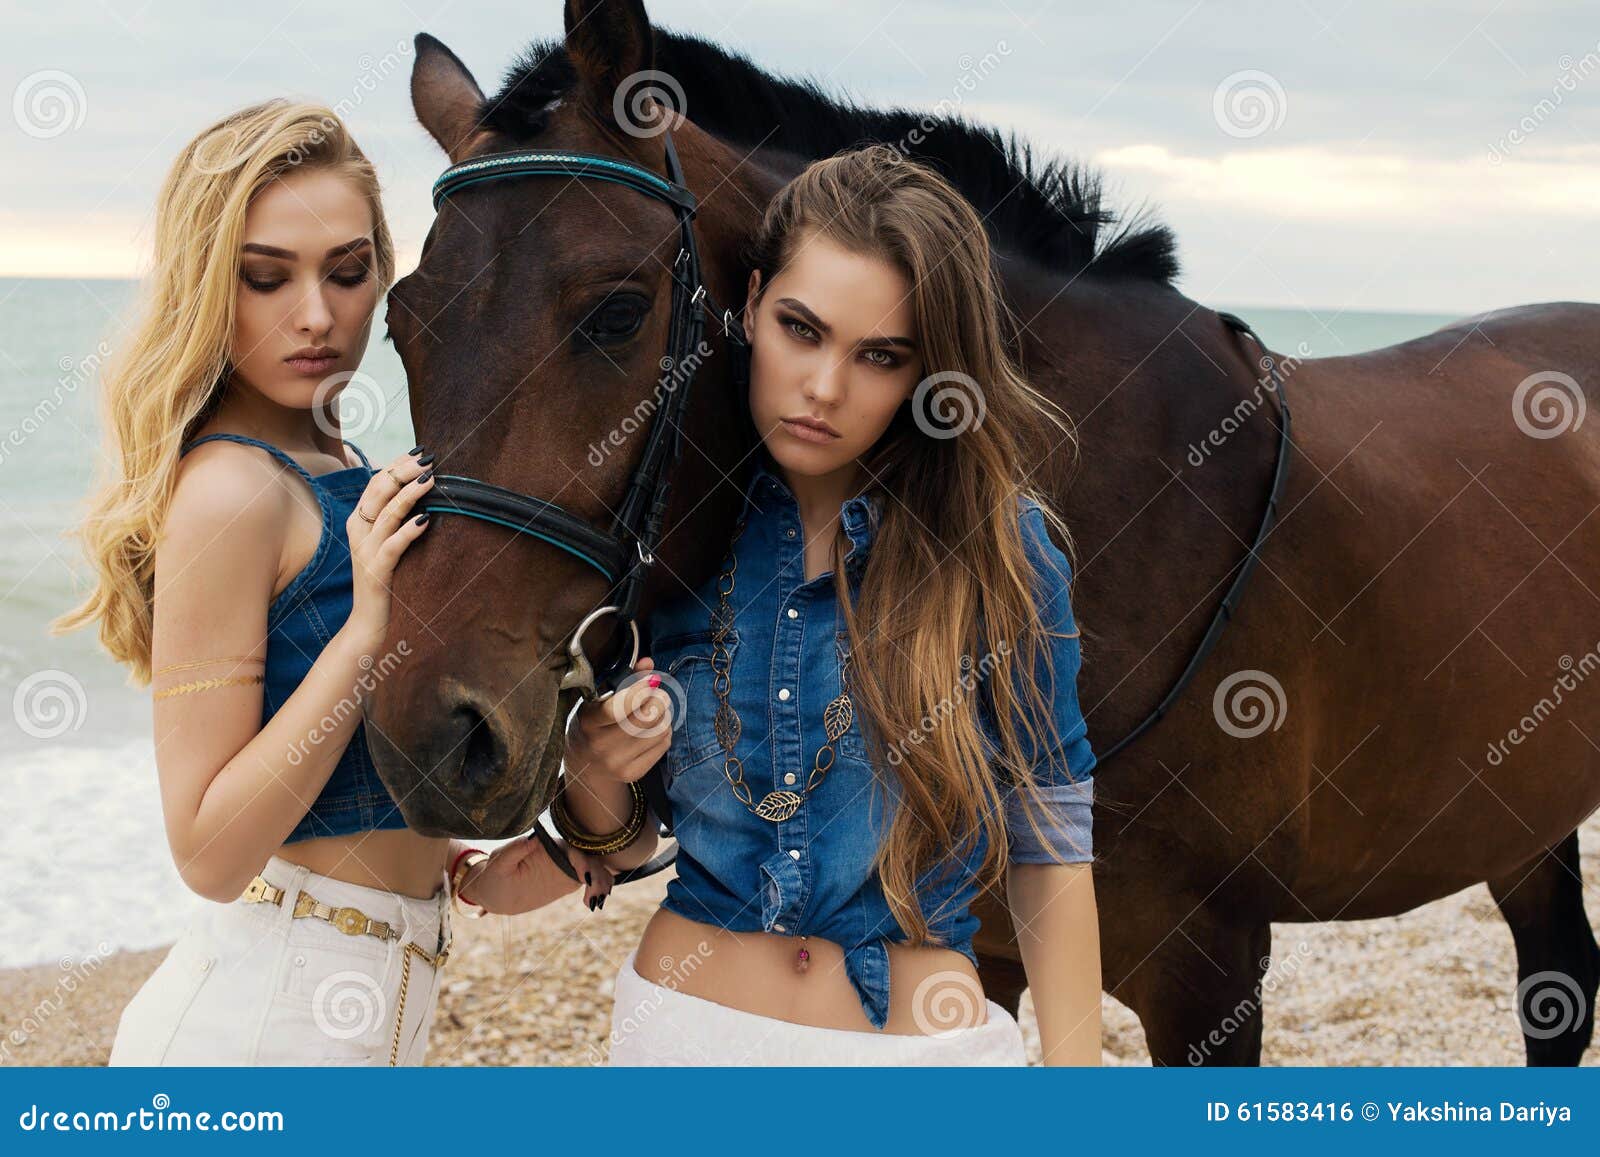 Oscar + Horses | Exclusive Male Model Fashion Editorial for Boys by Girls |  Horse photography poses, Men fashion photoshoot, Equine photography poses